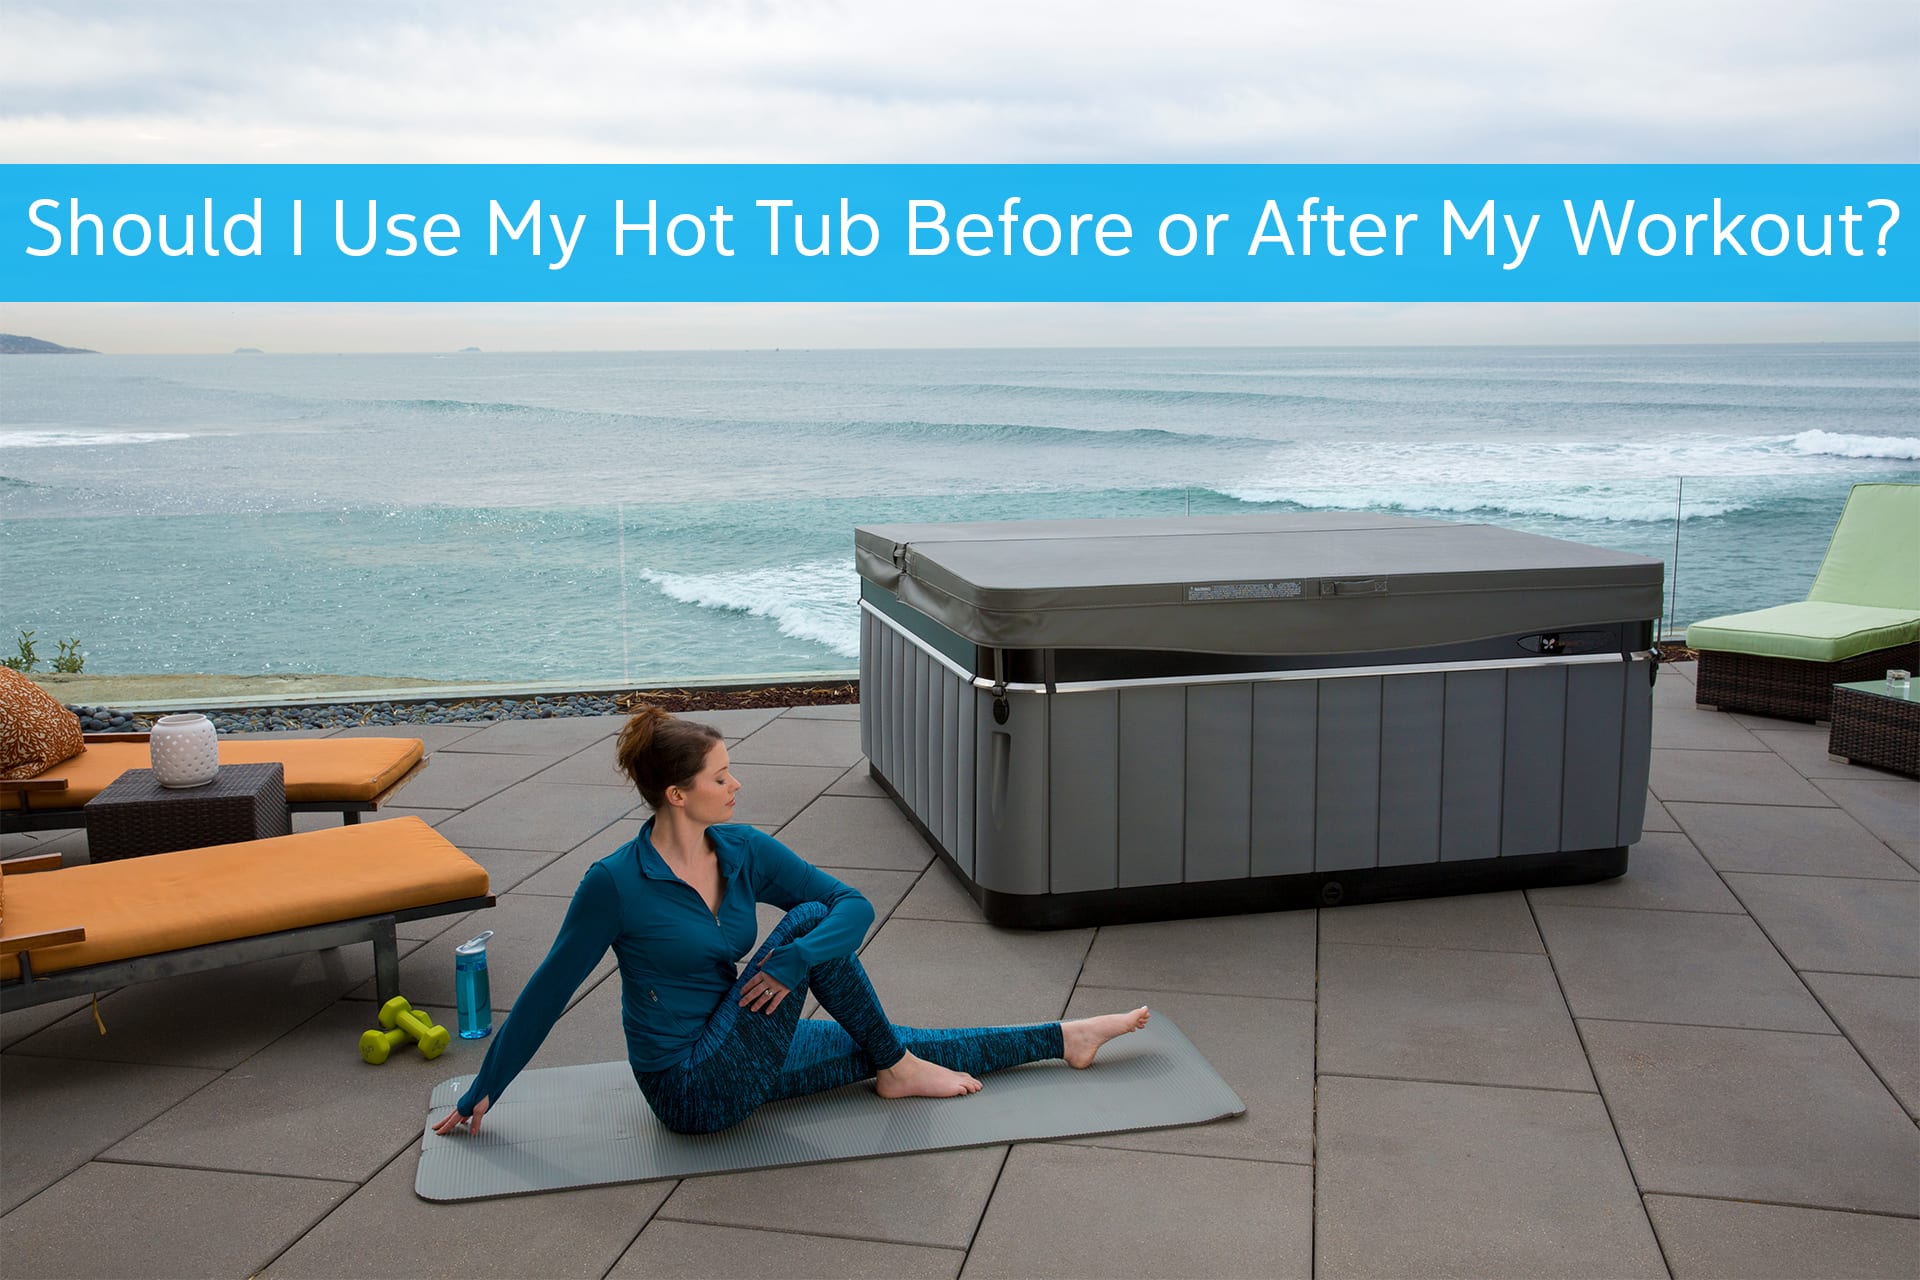 Should I Use my Hot Tub Before or After My Workout?